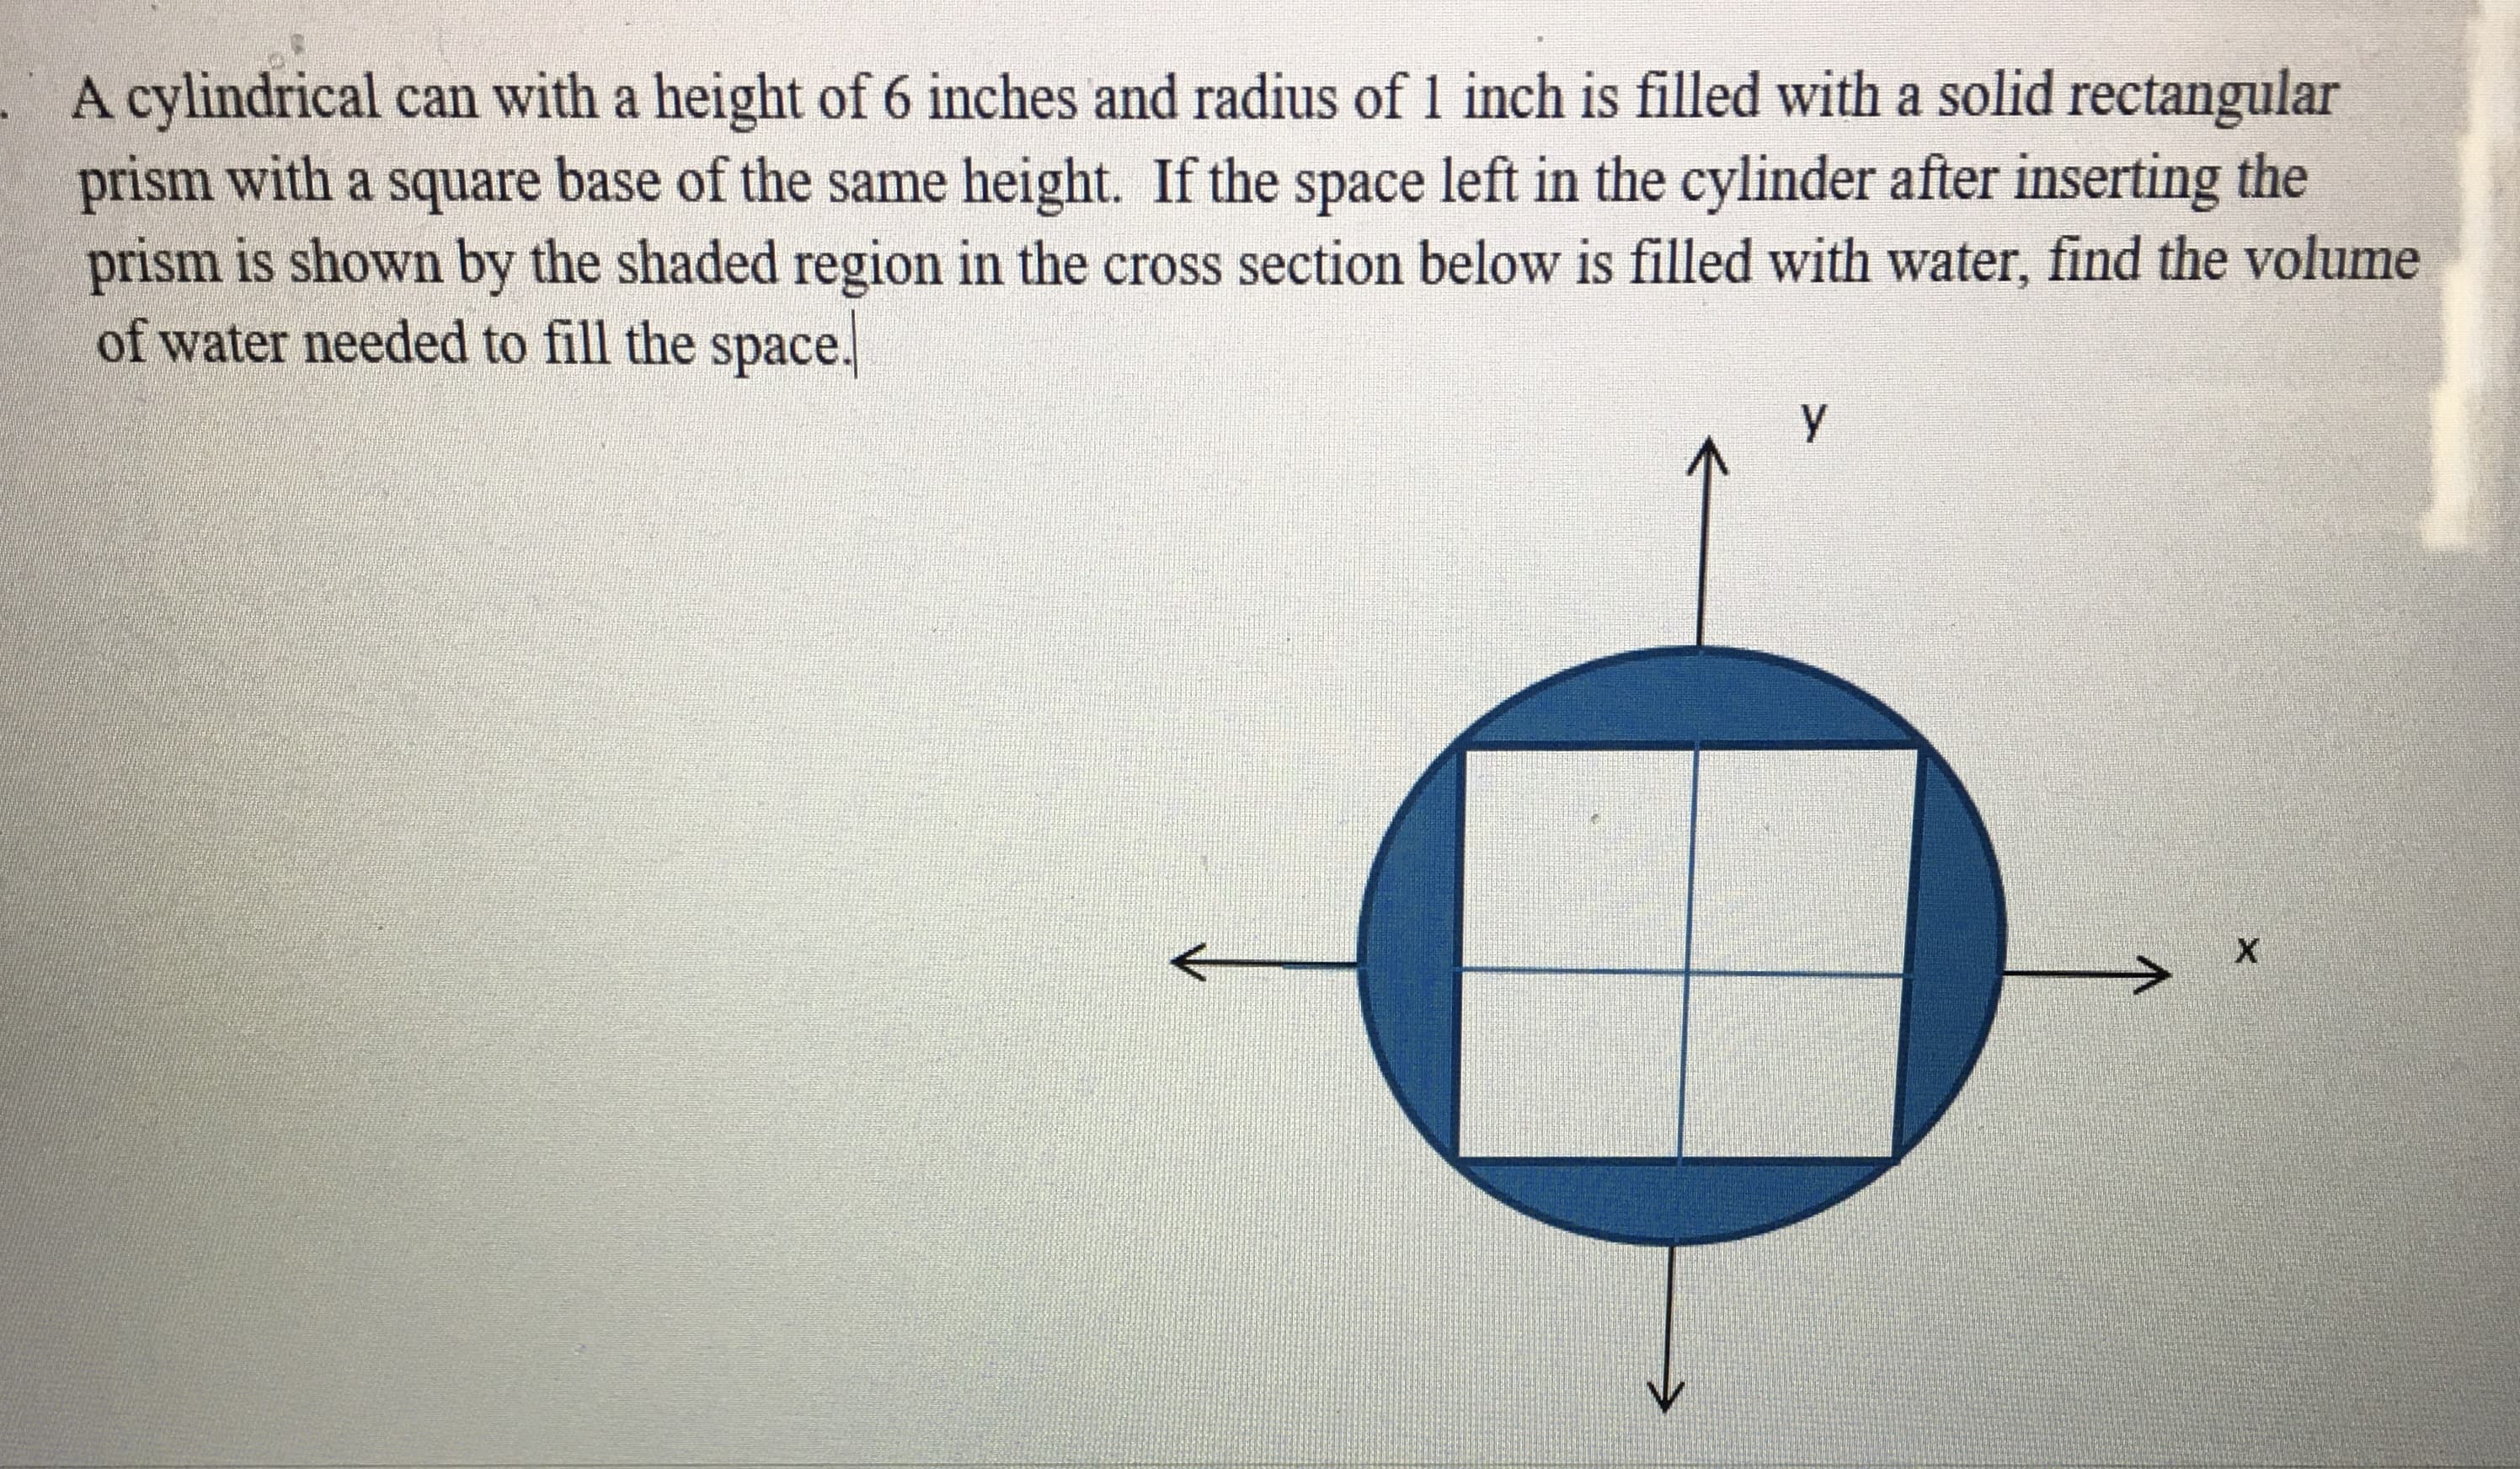 A cylindrical can with a height of 6 inches and radius of 1 inch is filled with a solid rectangular
prism with a square base of the same height. If the space left in the cylinder after inserting the
prism is shown by the shaded region in the cross section below is filled with water, find the volume
of water needed to fill the space.
У
